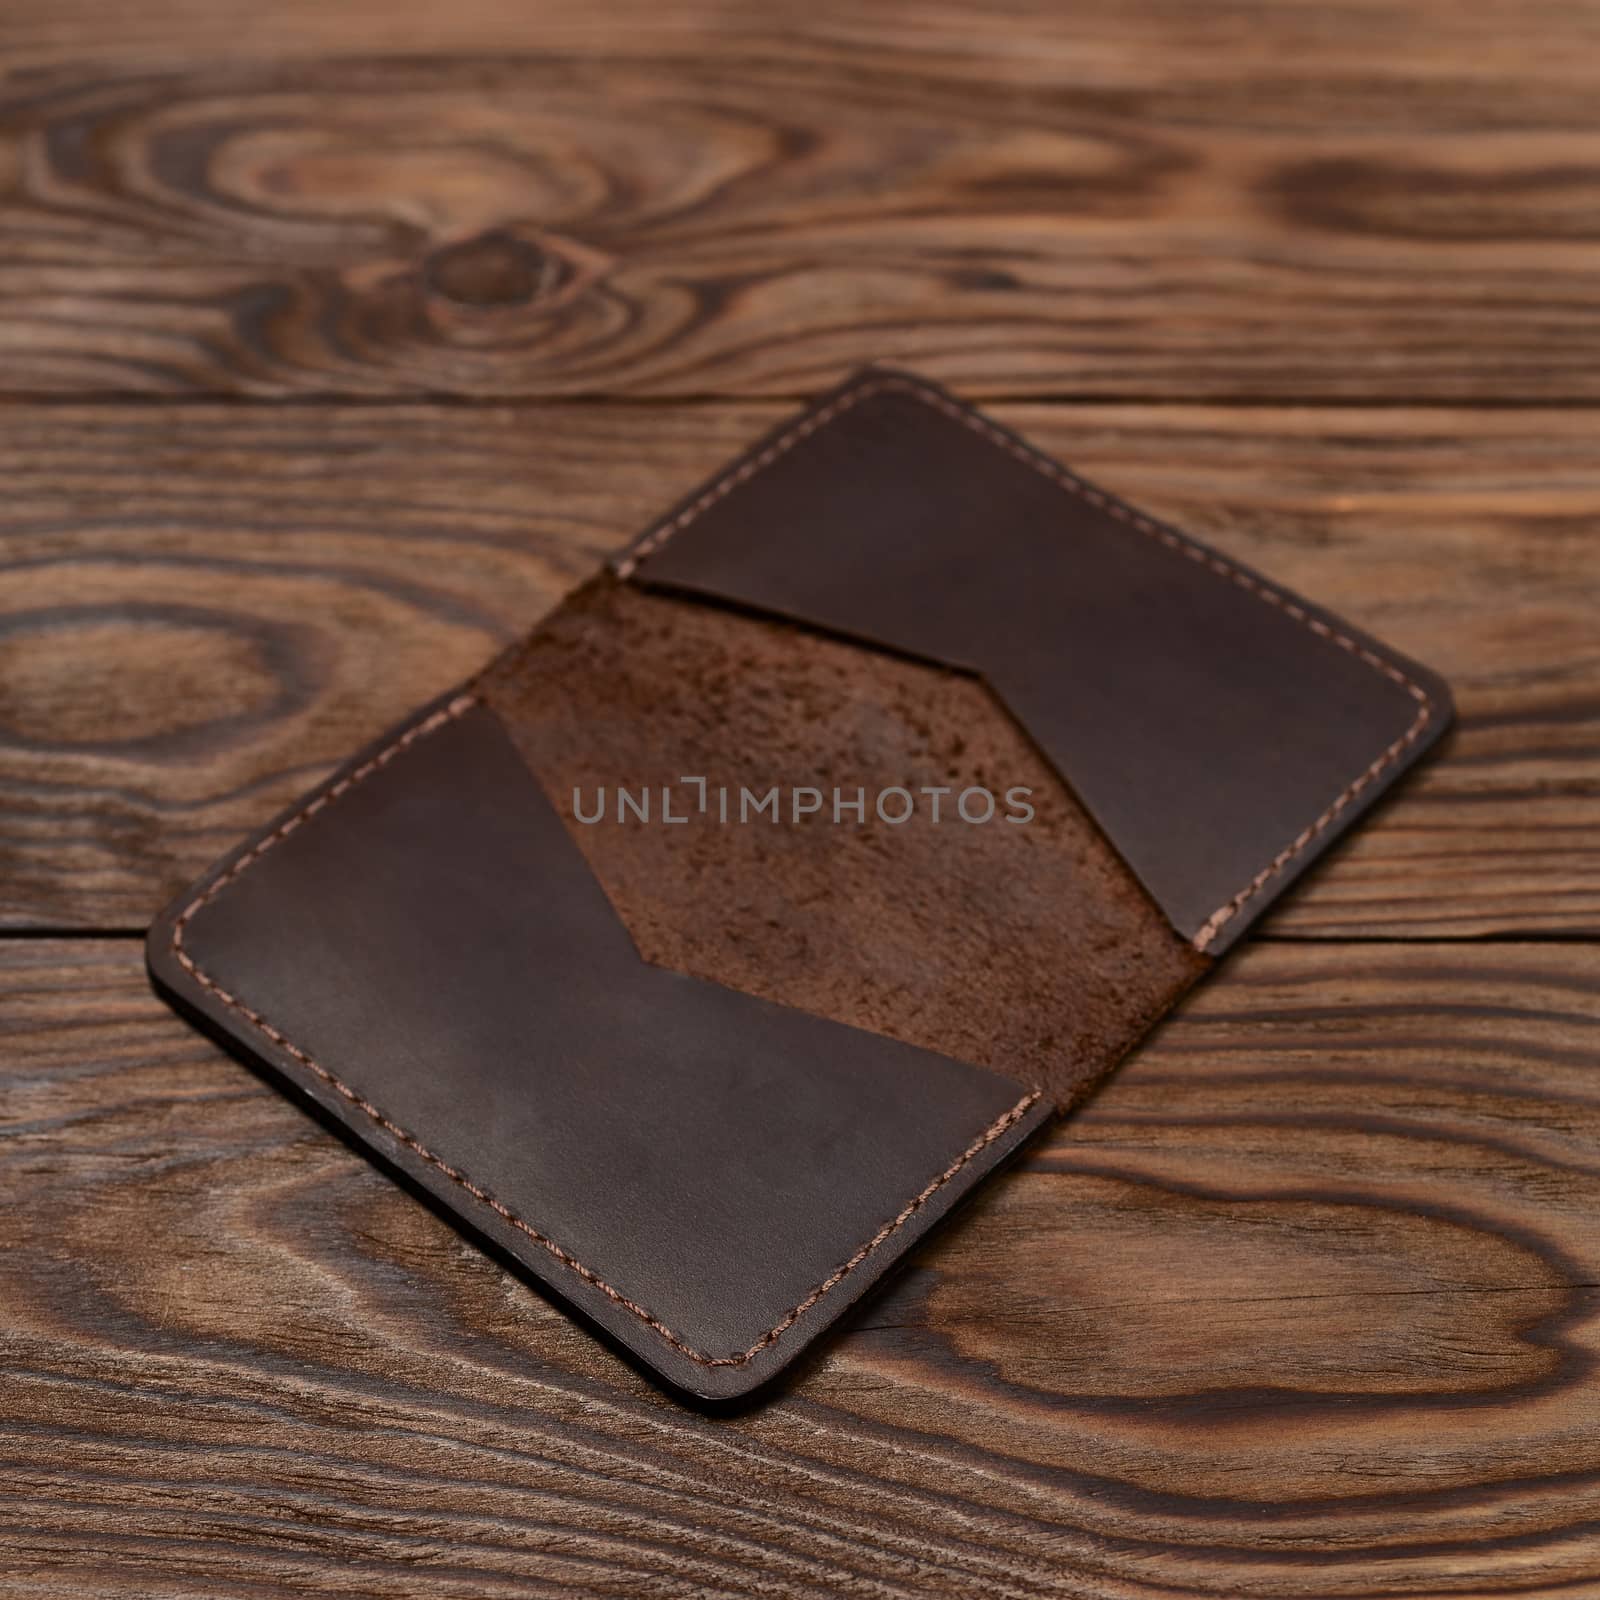 Handmade brown leather cardholder on wooden background. Stock photo with blurred background. by alexsdriver